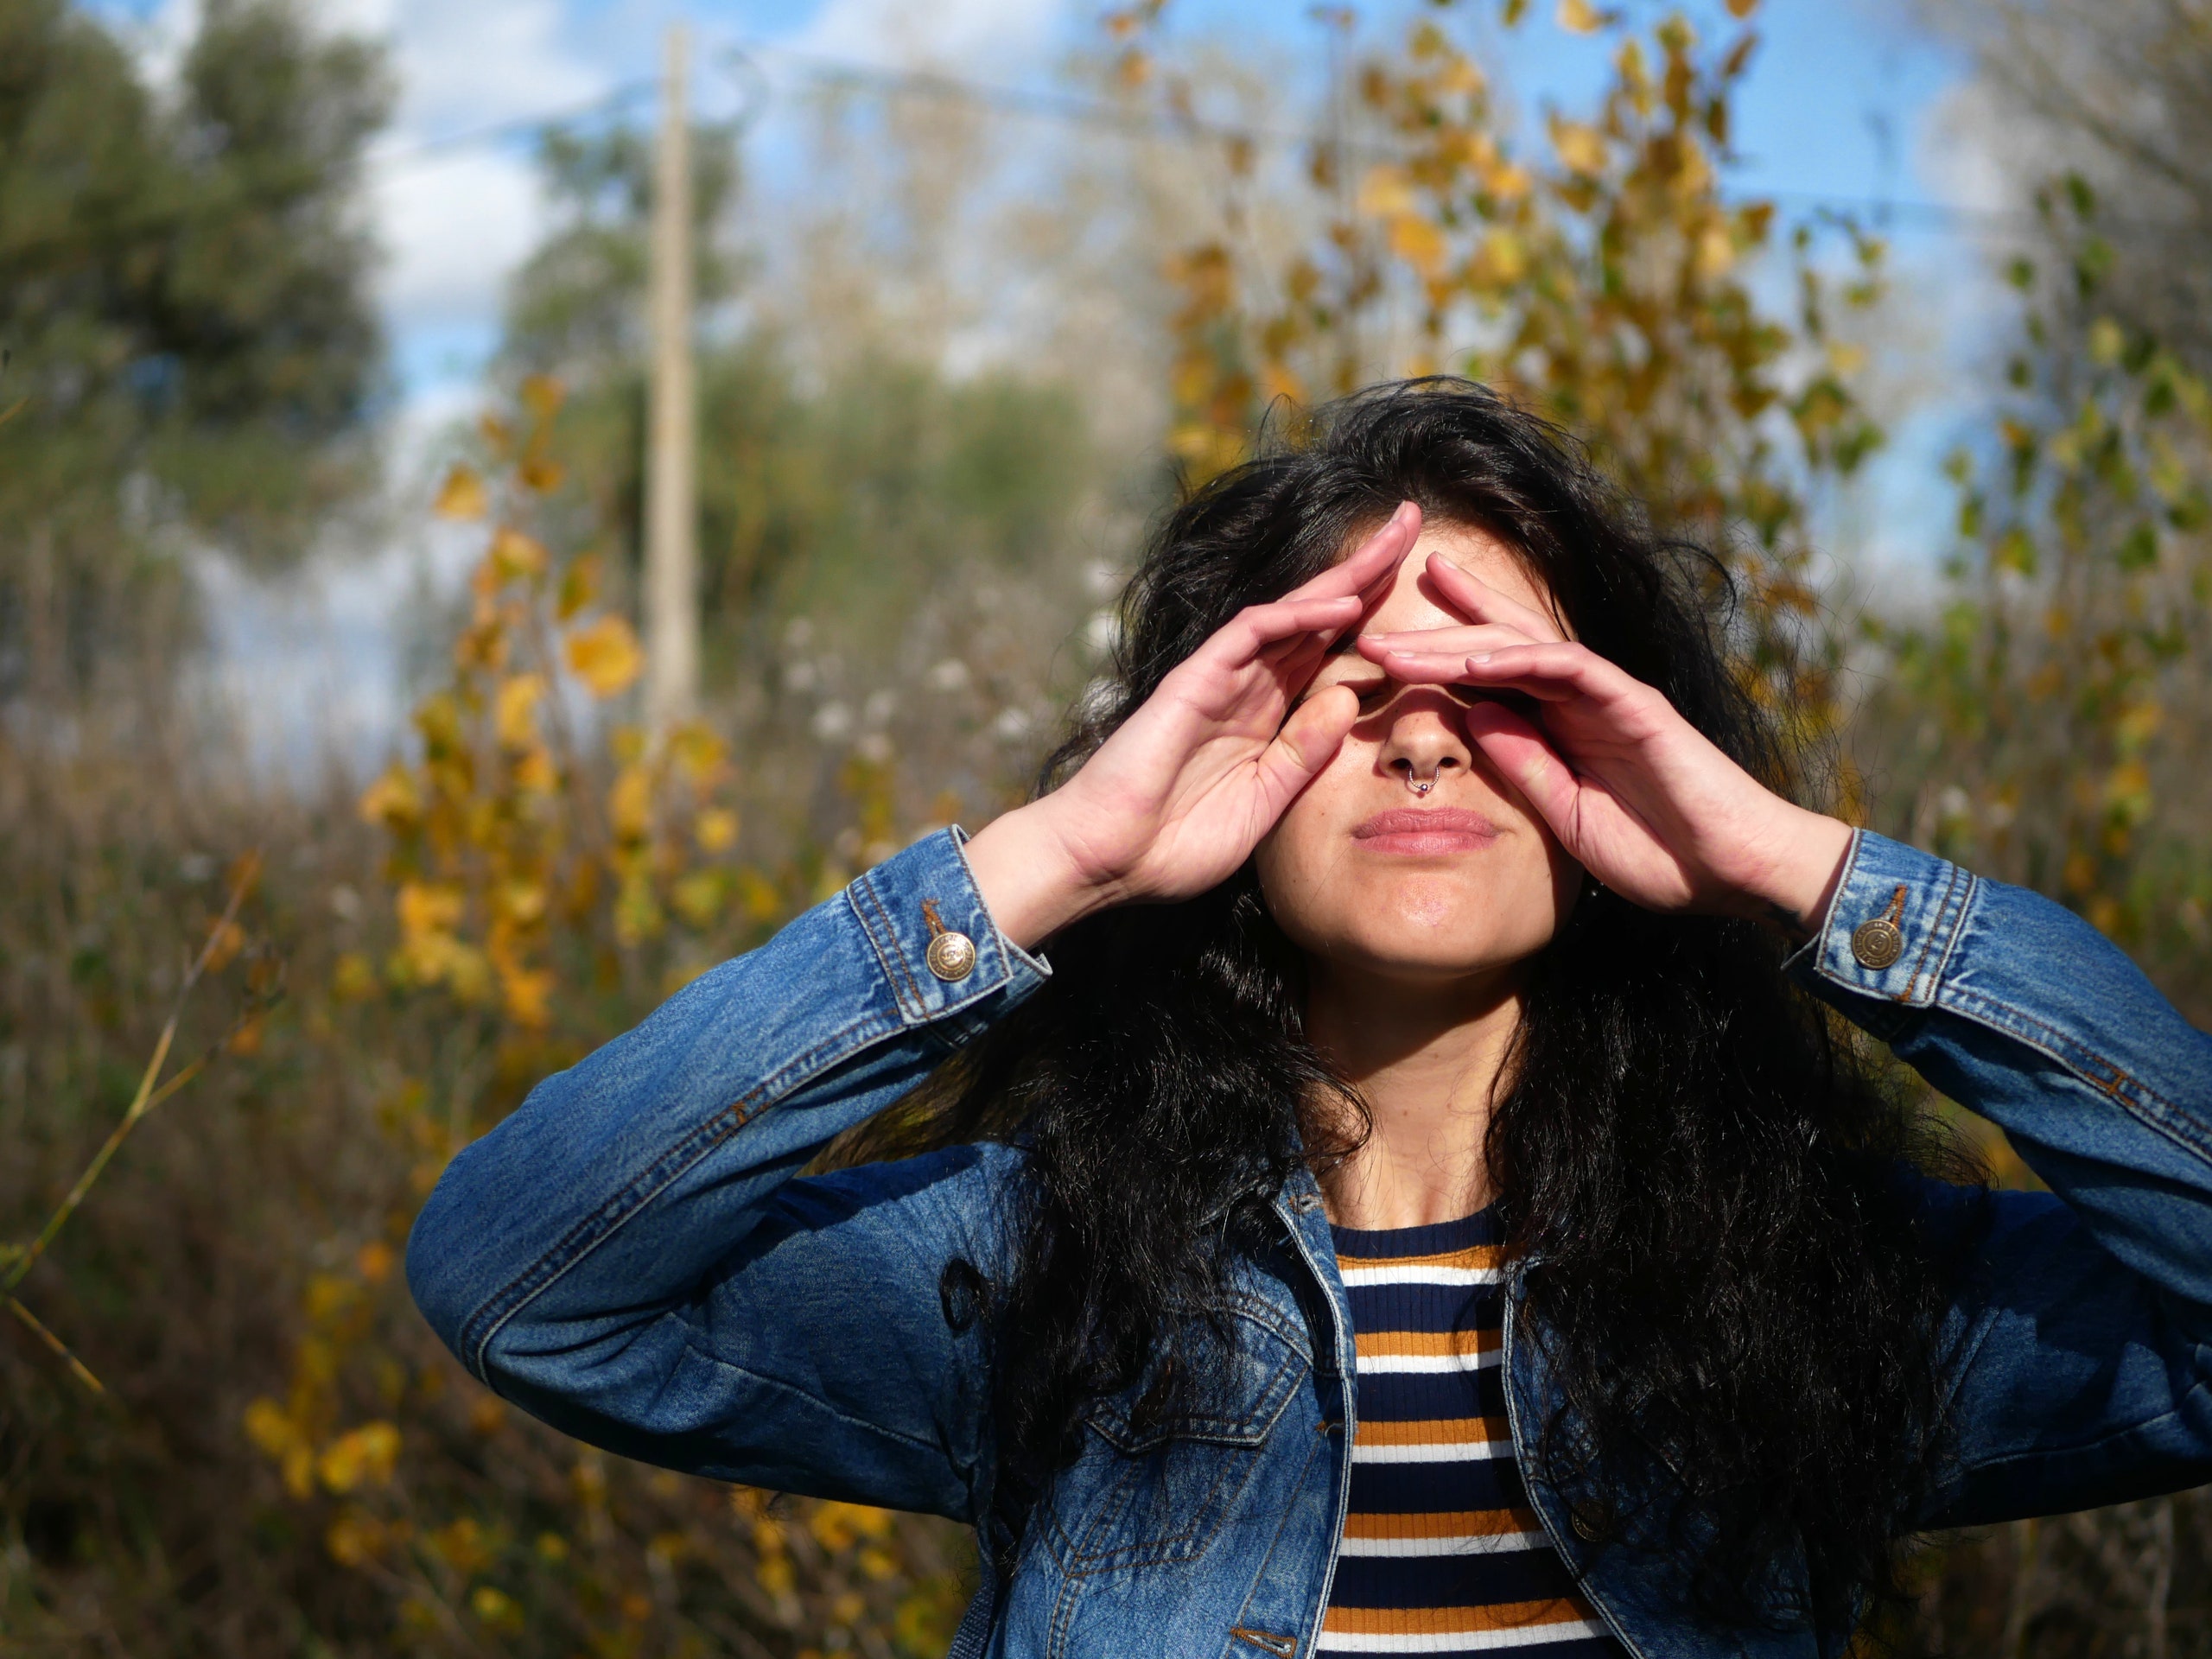 6 Simple Ways to Take Better Care of Your Eyes